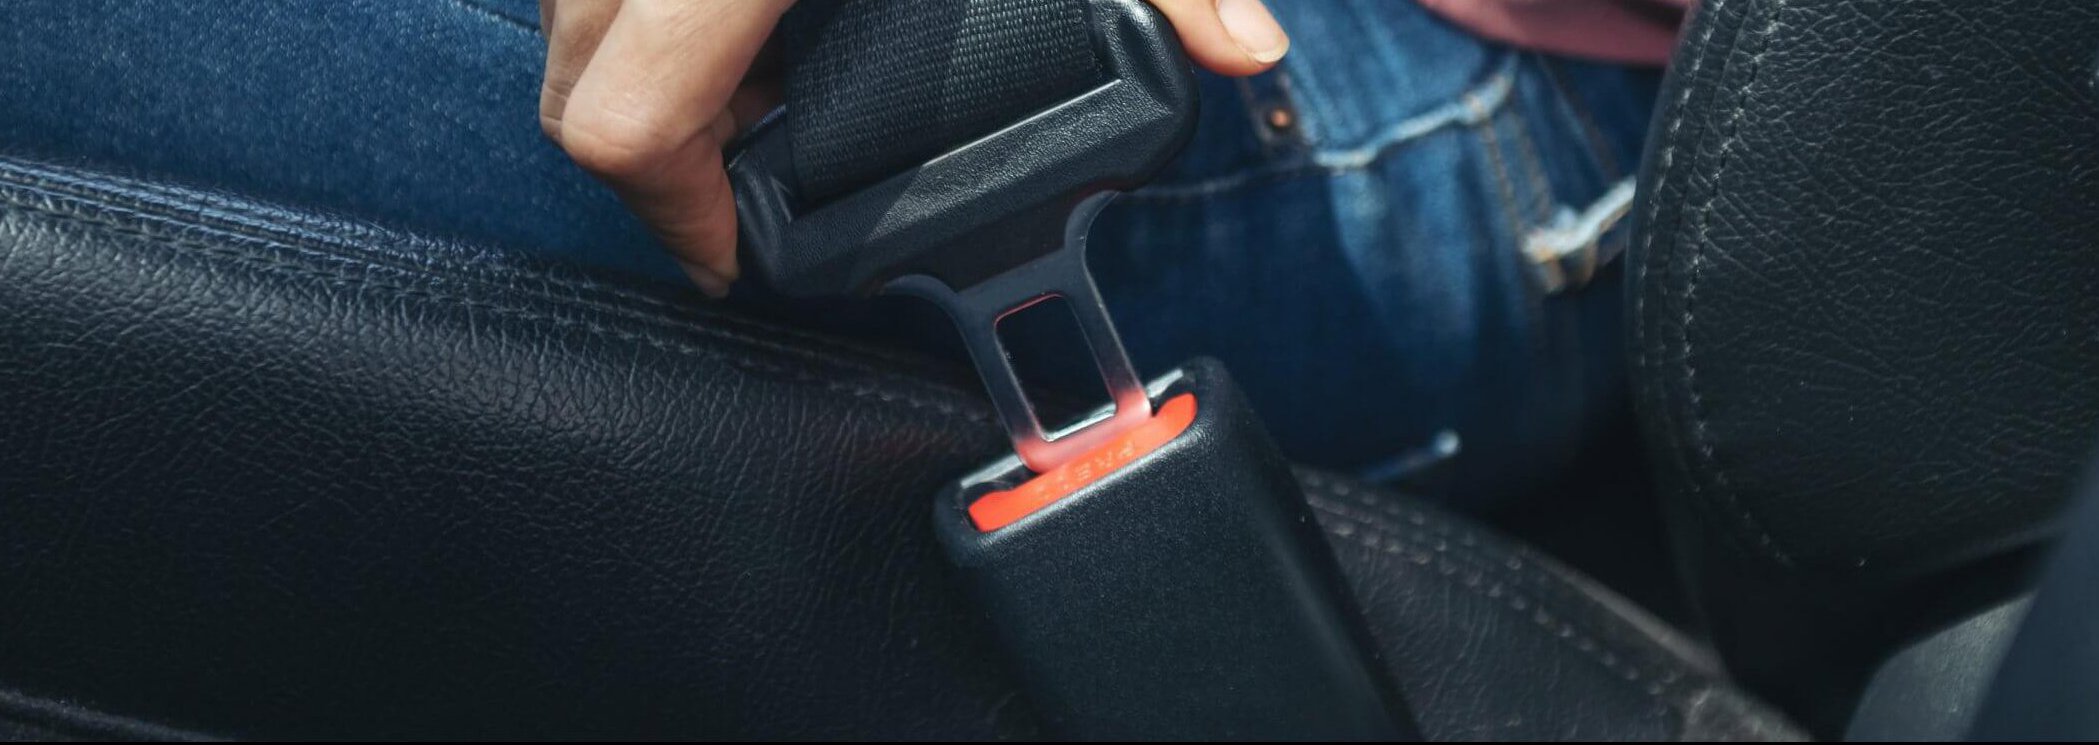 Element of car seat belt with selective focus on blurred background.  Automobile interior with chrome belt buckle and black seat belt. passenger  safety in a car. Fasten the belts human security Stock